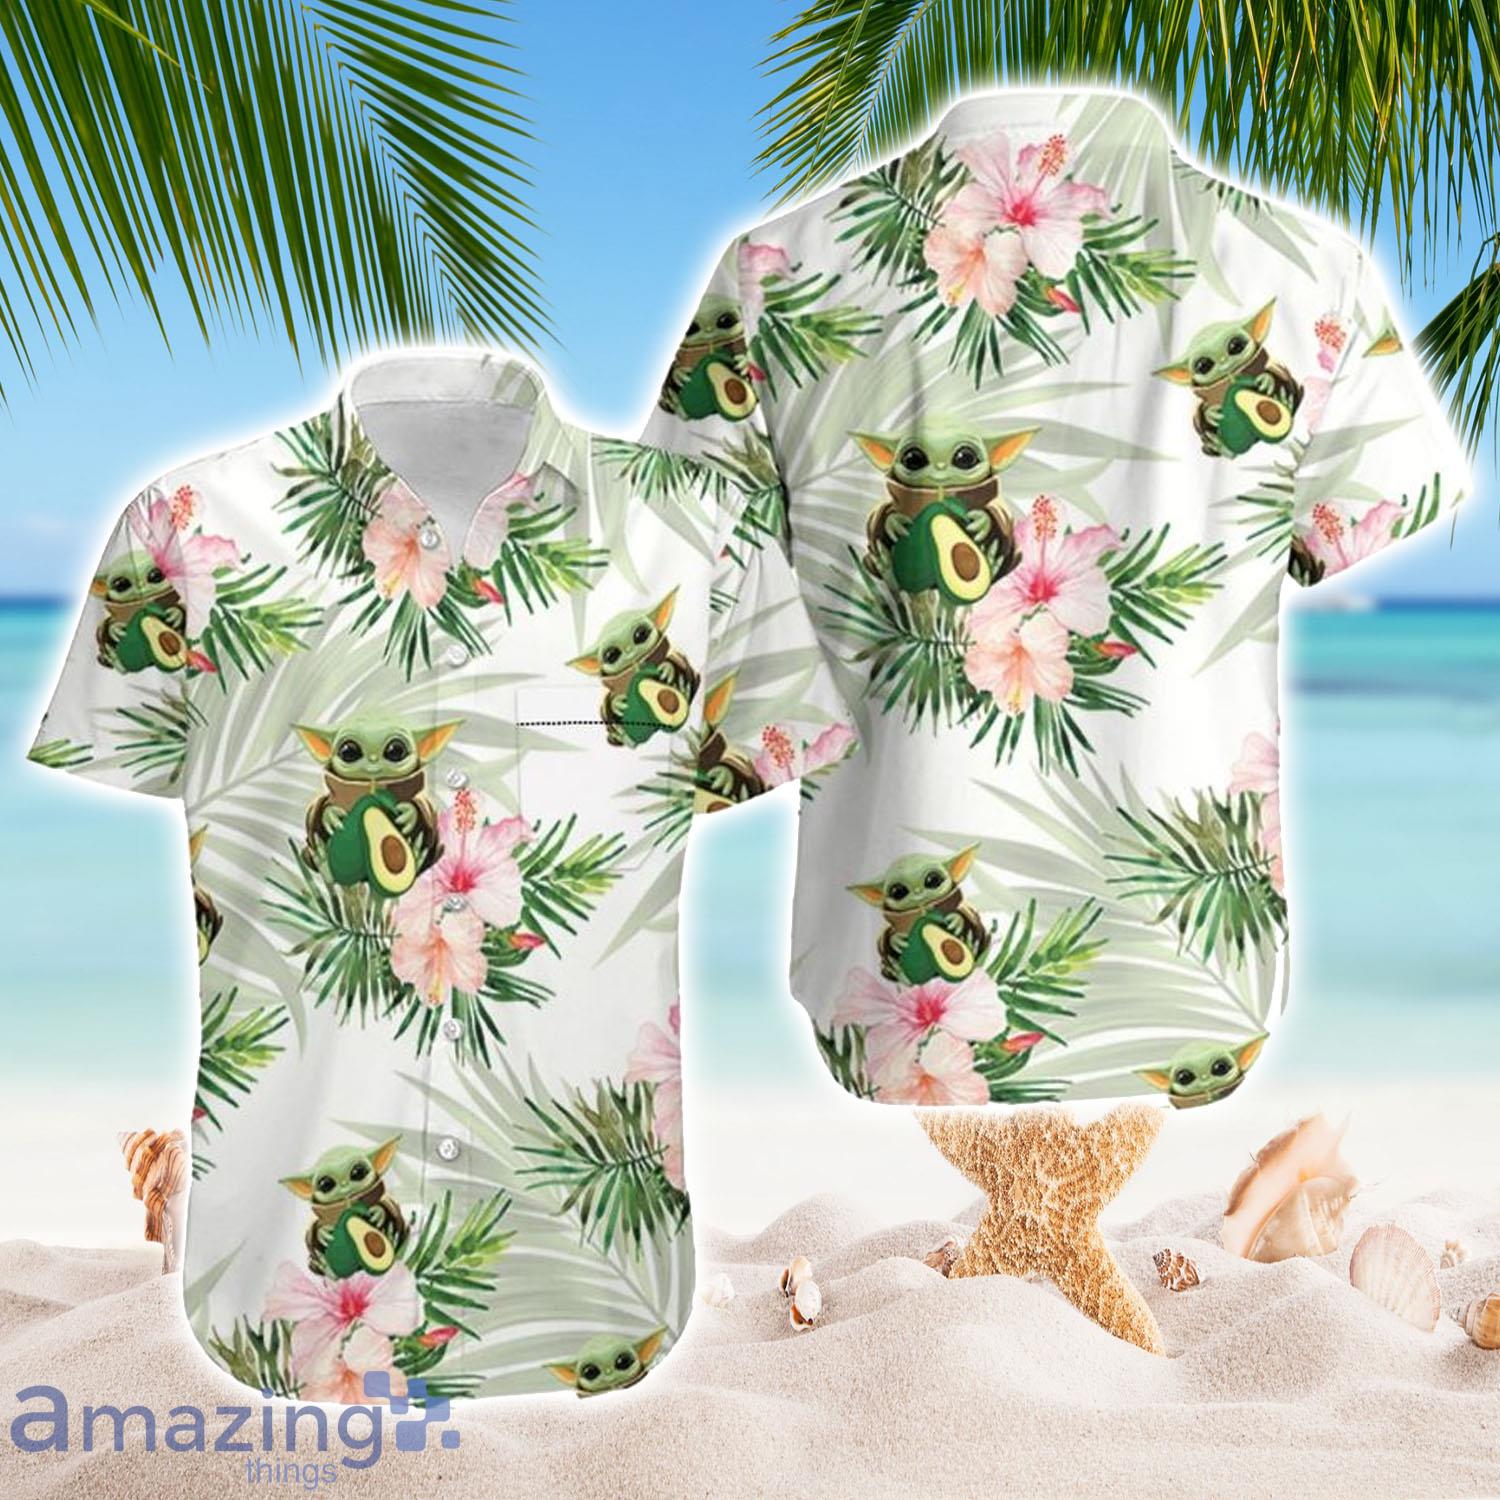 Baby Yoda Hugging Avocadoes Seamless Tropical Colorful Flowers Green Leaves On White Hawaiian Shirt - Baby Yoda Hugging Avocadoes Seamless Tropical Colorful Flowers Green Leaves On White Hawaiian Shirt